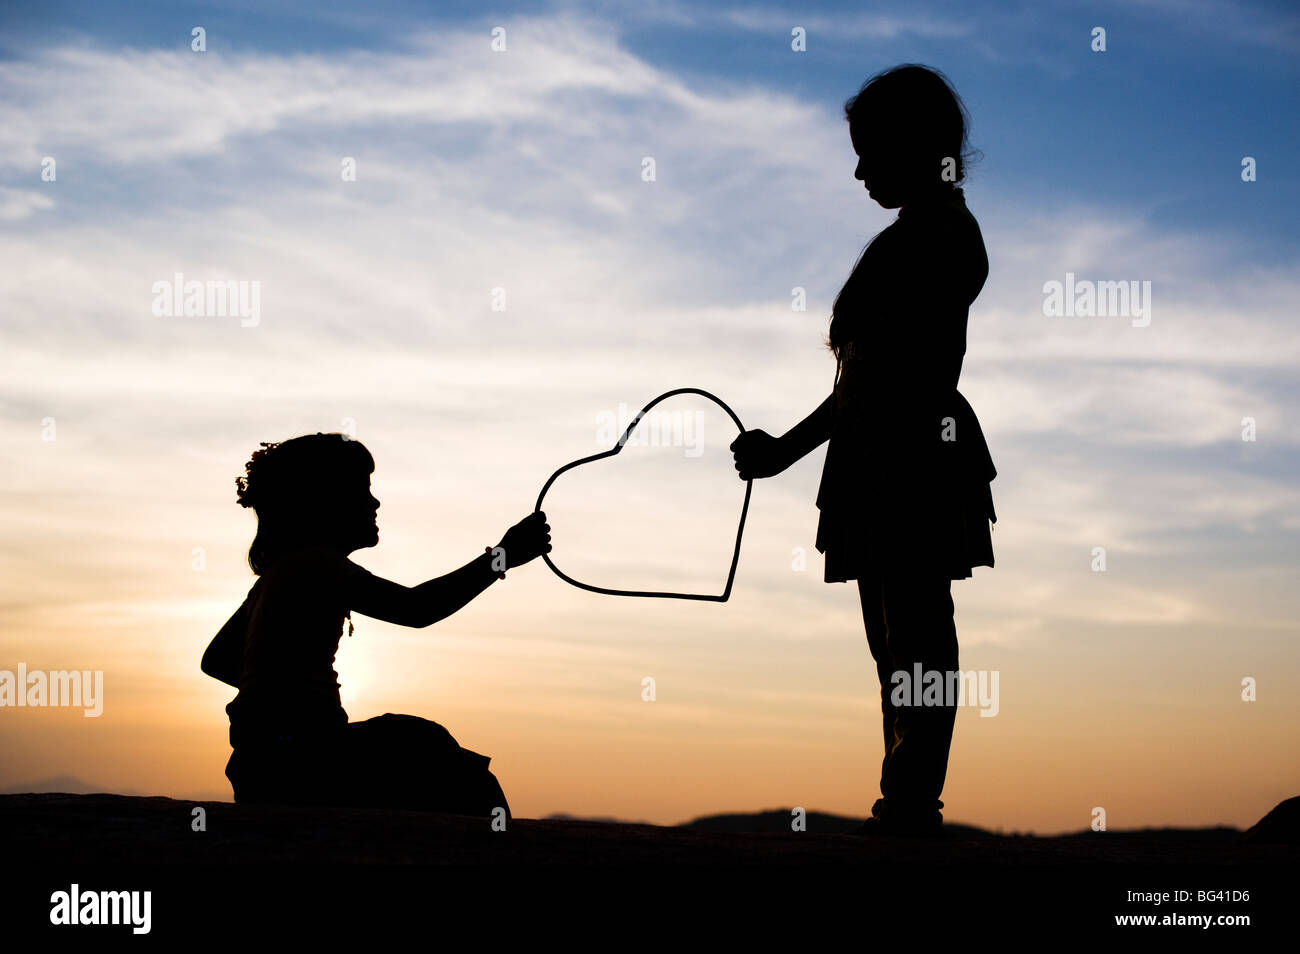 Silhouette of a two young Indian girls giving and taking a heart shape at sunset. India Stock Photo